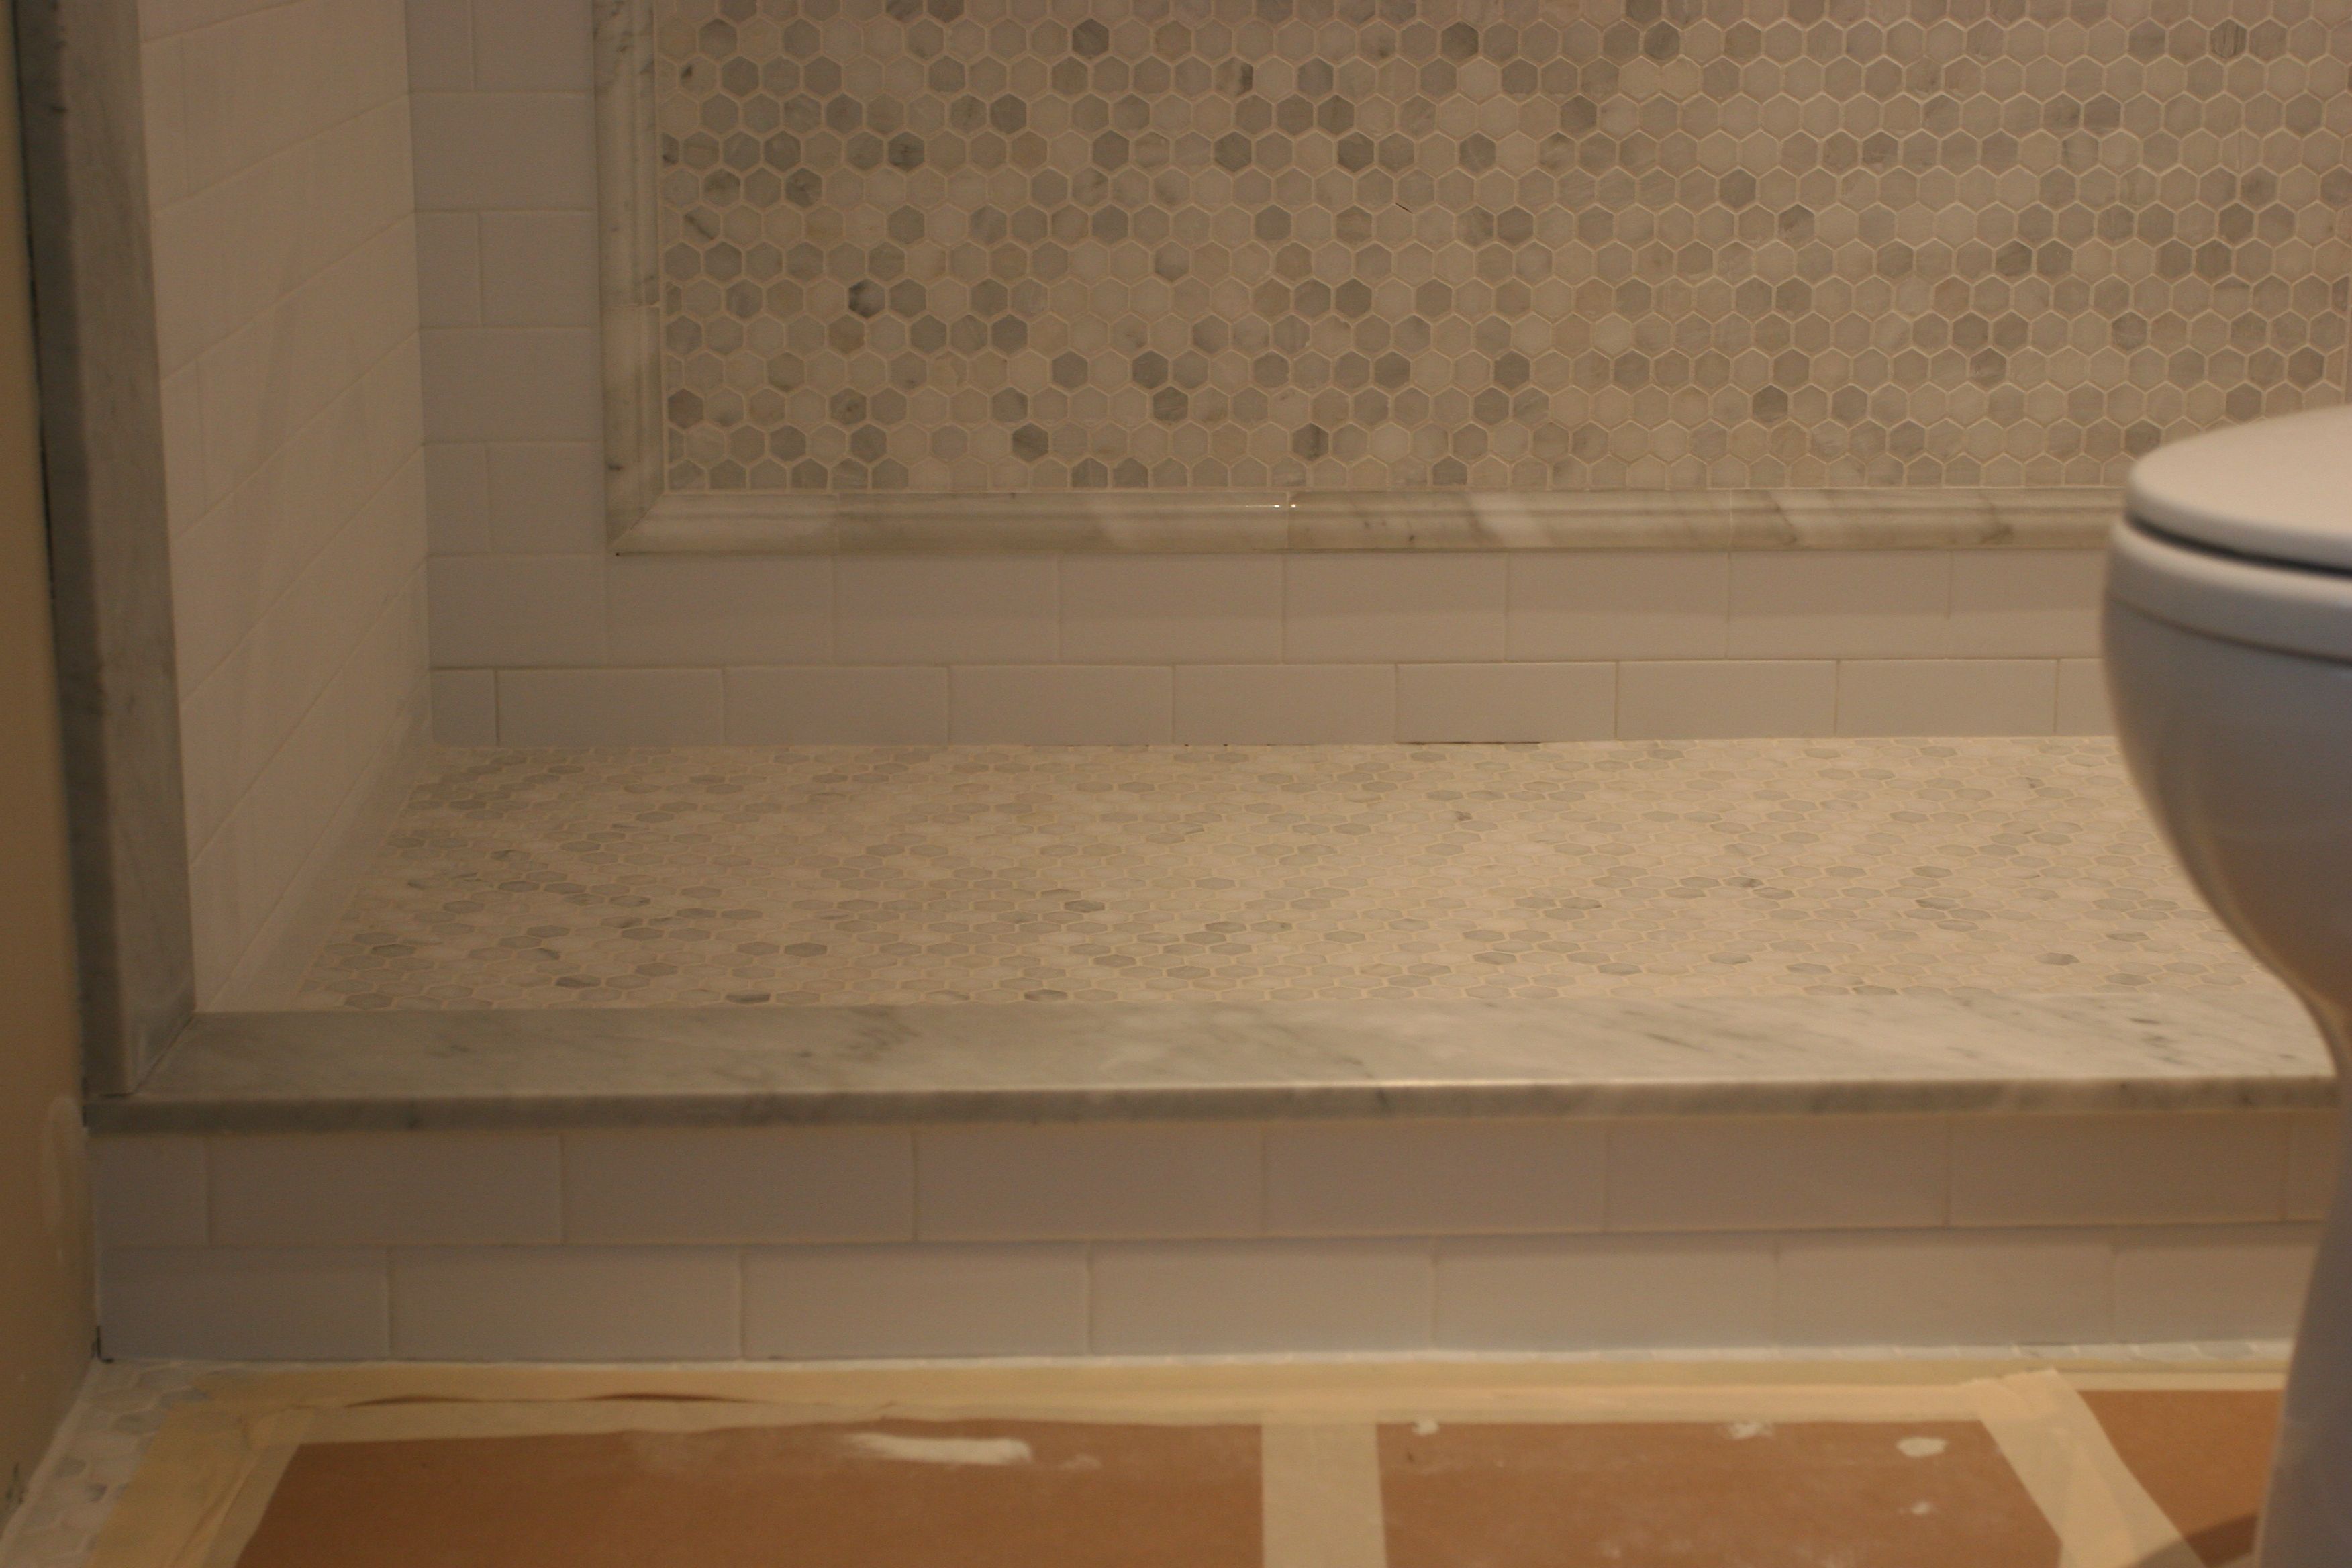 The skirt is the lowest row of tile in the shower; the curb is the part where the threshold is.